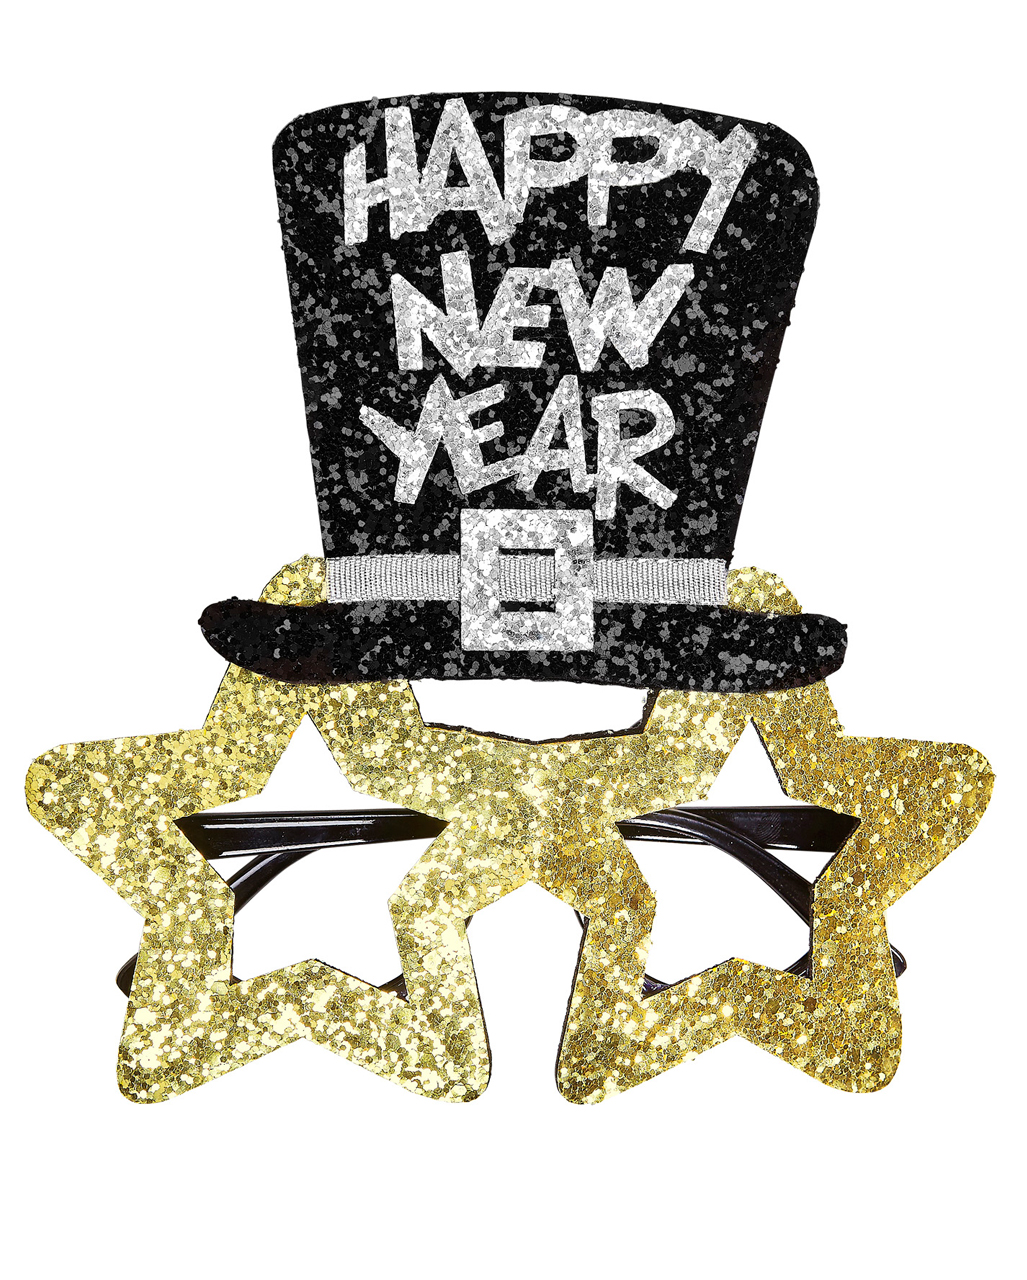 horrorshop com happy new year brille silvester brille silvester geschenk silvester party accessoire partybrille 26971 01